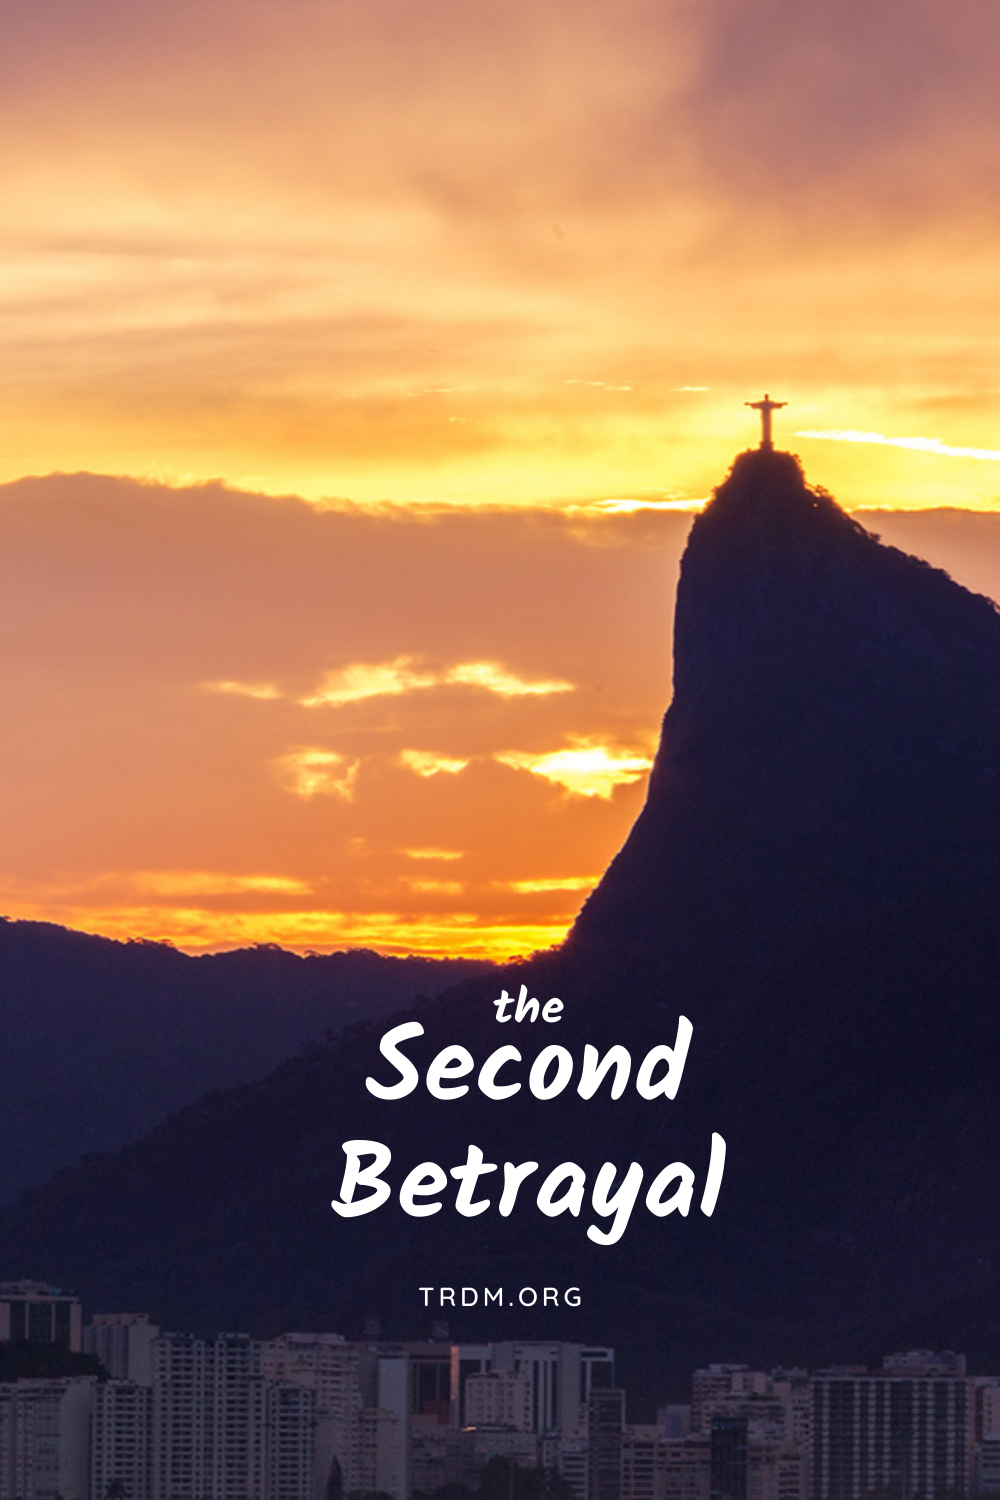 THE SECOND BETRAYAL